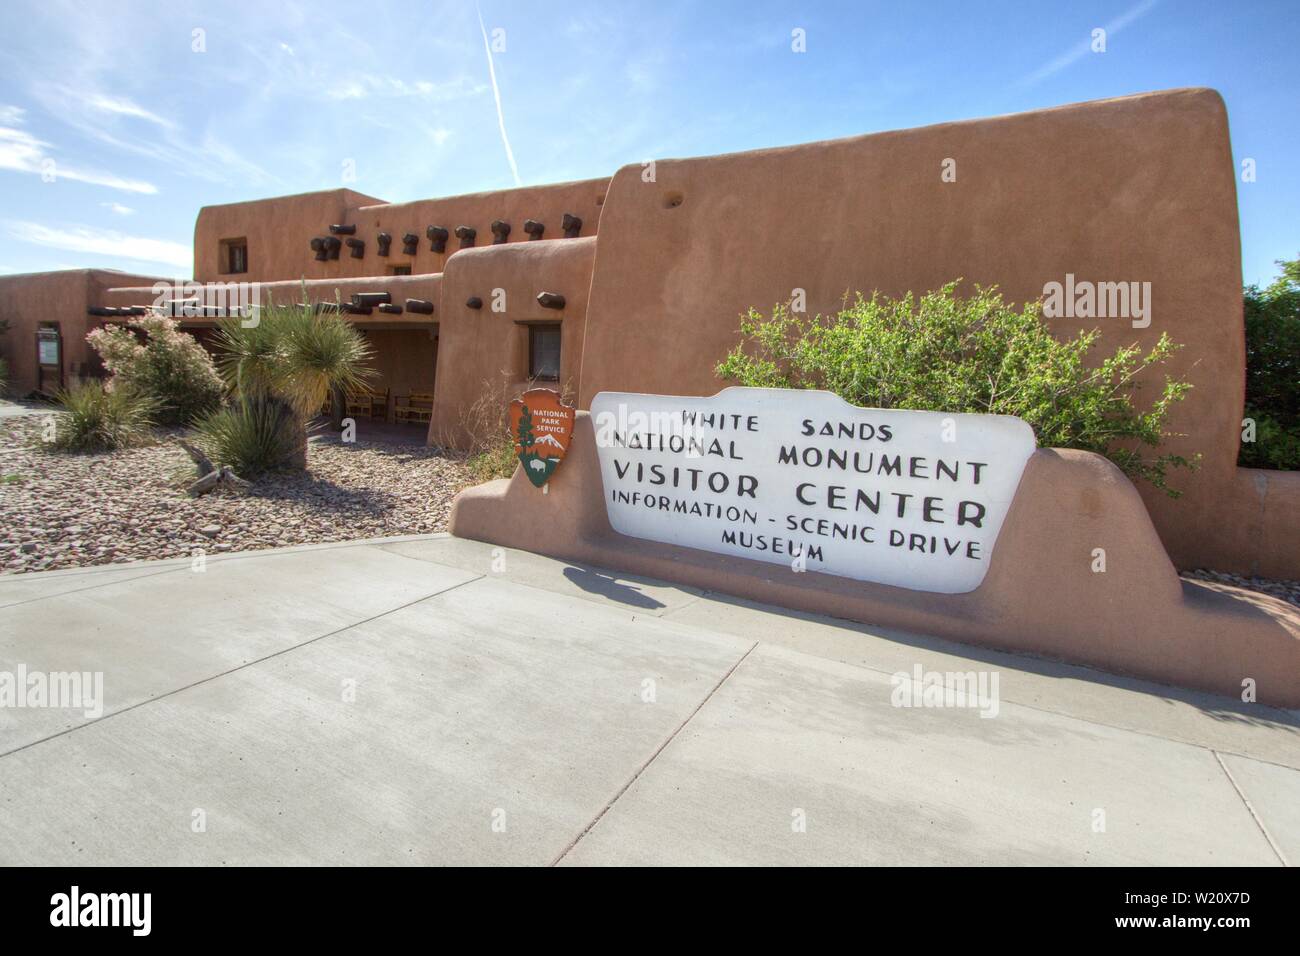 Alamogordo, New Mexico, USA -: Entrance to the White Sands National Monument Visitor Center in New Mexico. The park features massive gypsum sand dunes Stock Photo